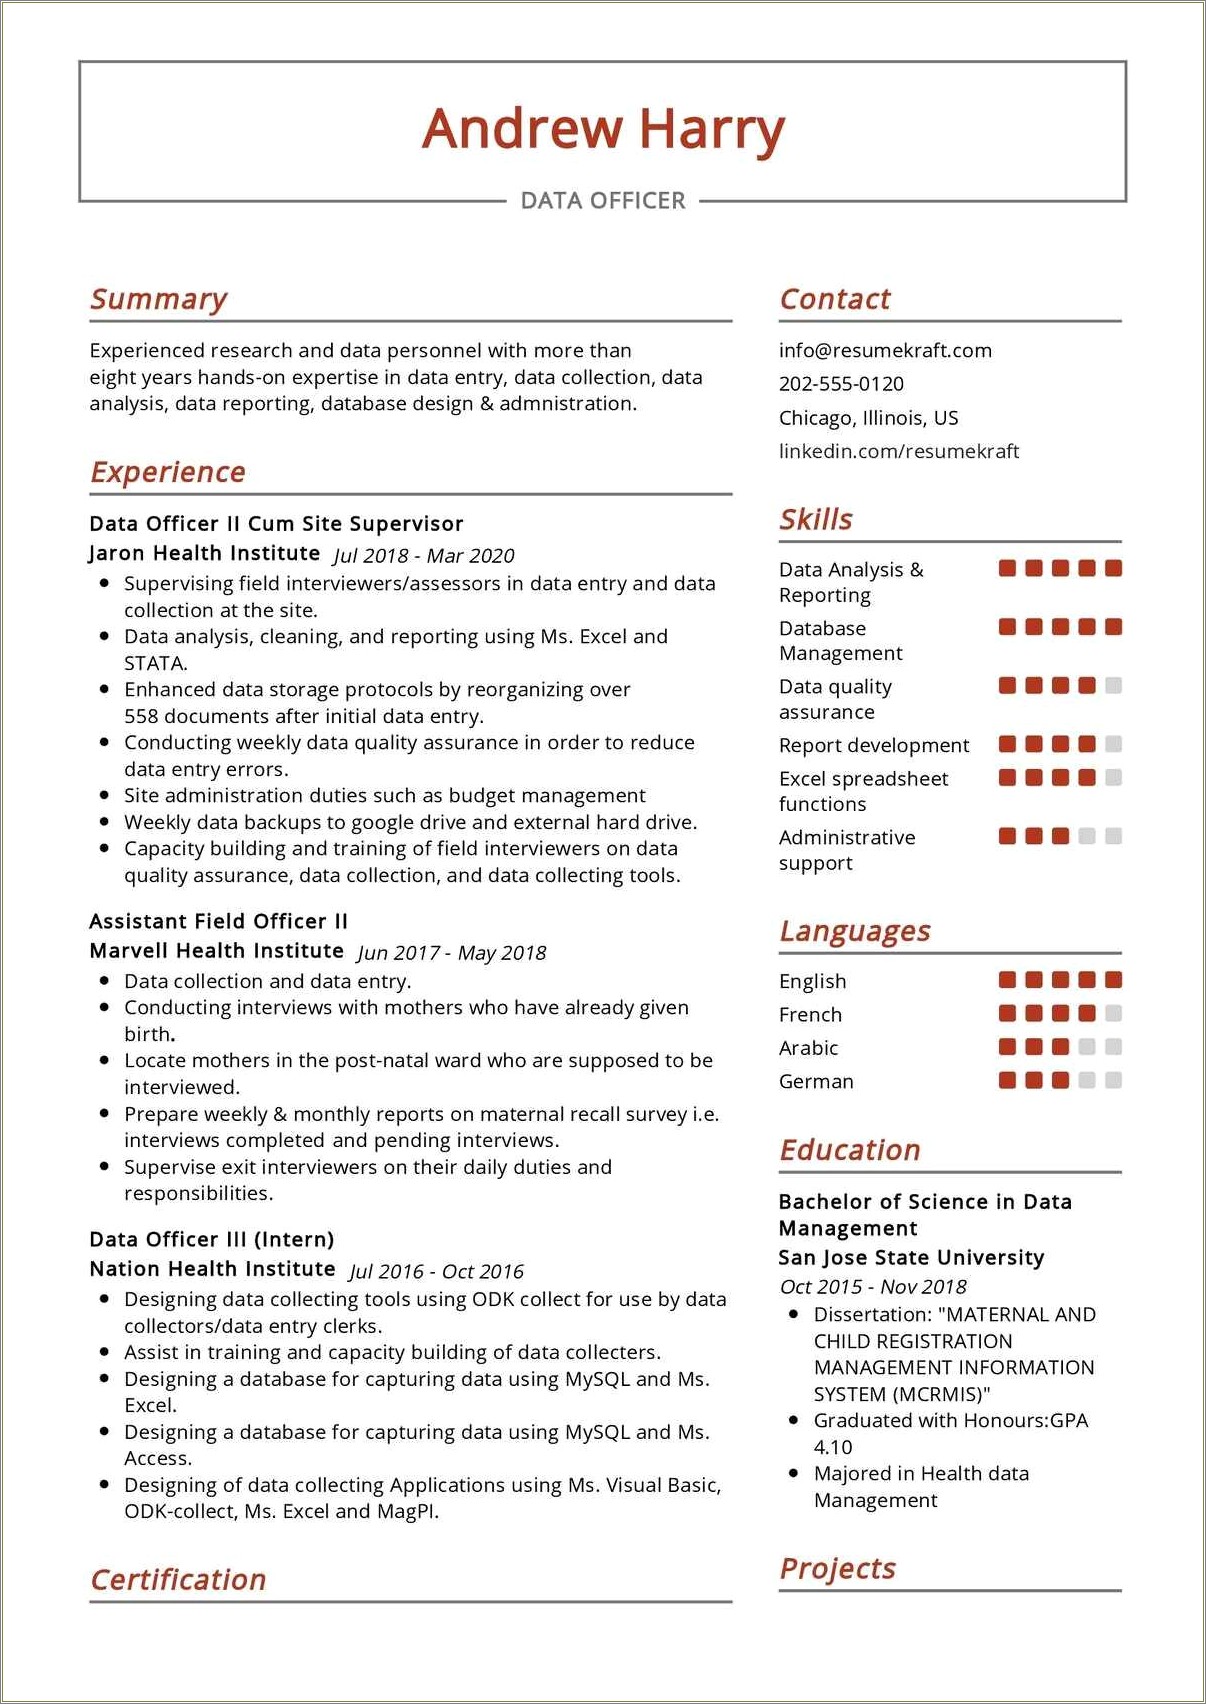 Excel Skills To Highlight On Resume